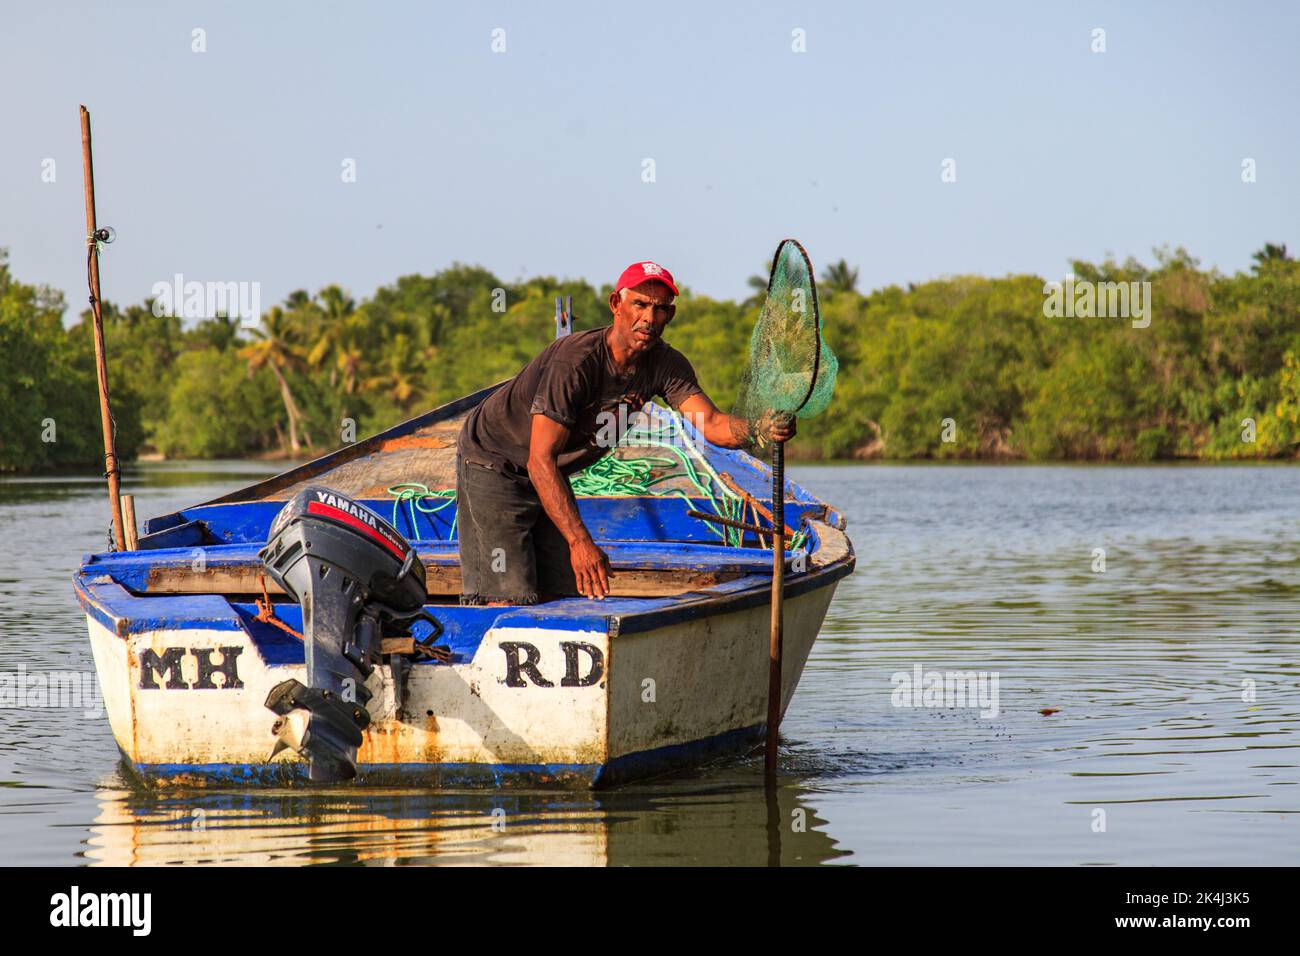 Miches, El Seibo, May 23, 2015: Fisherman on his way out to sea to fish in Miches, Dominican Republic. Stock Photo